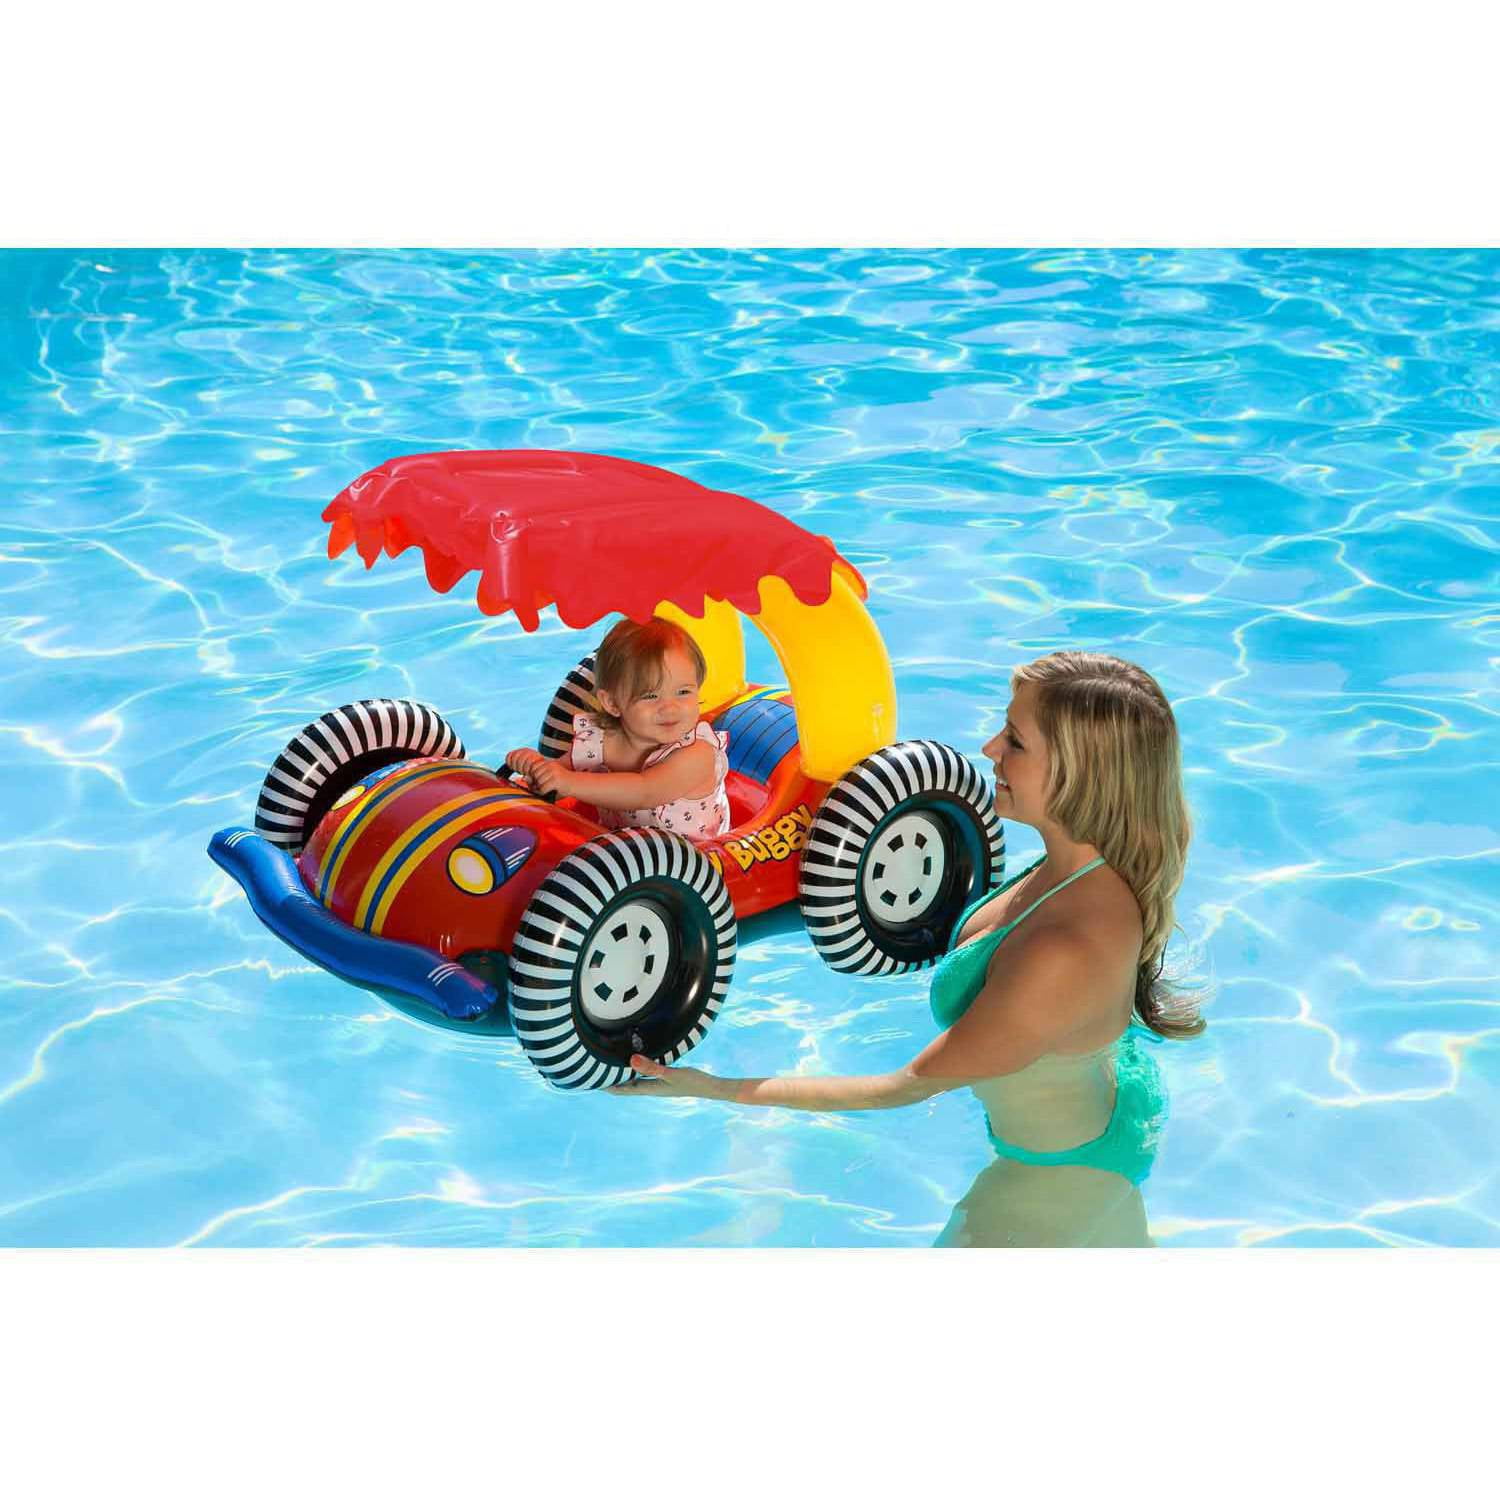 Poolmaster 81556 Swimming Pool Little Lady Bug Buggy Baby Seat Rider With Canopy 